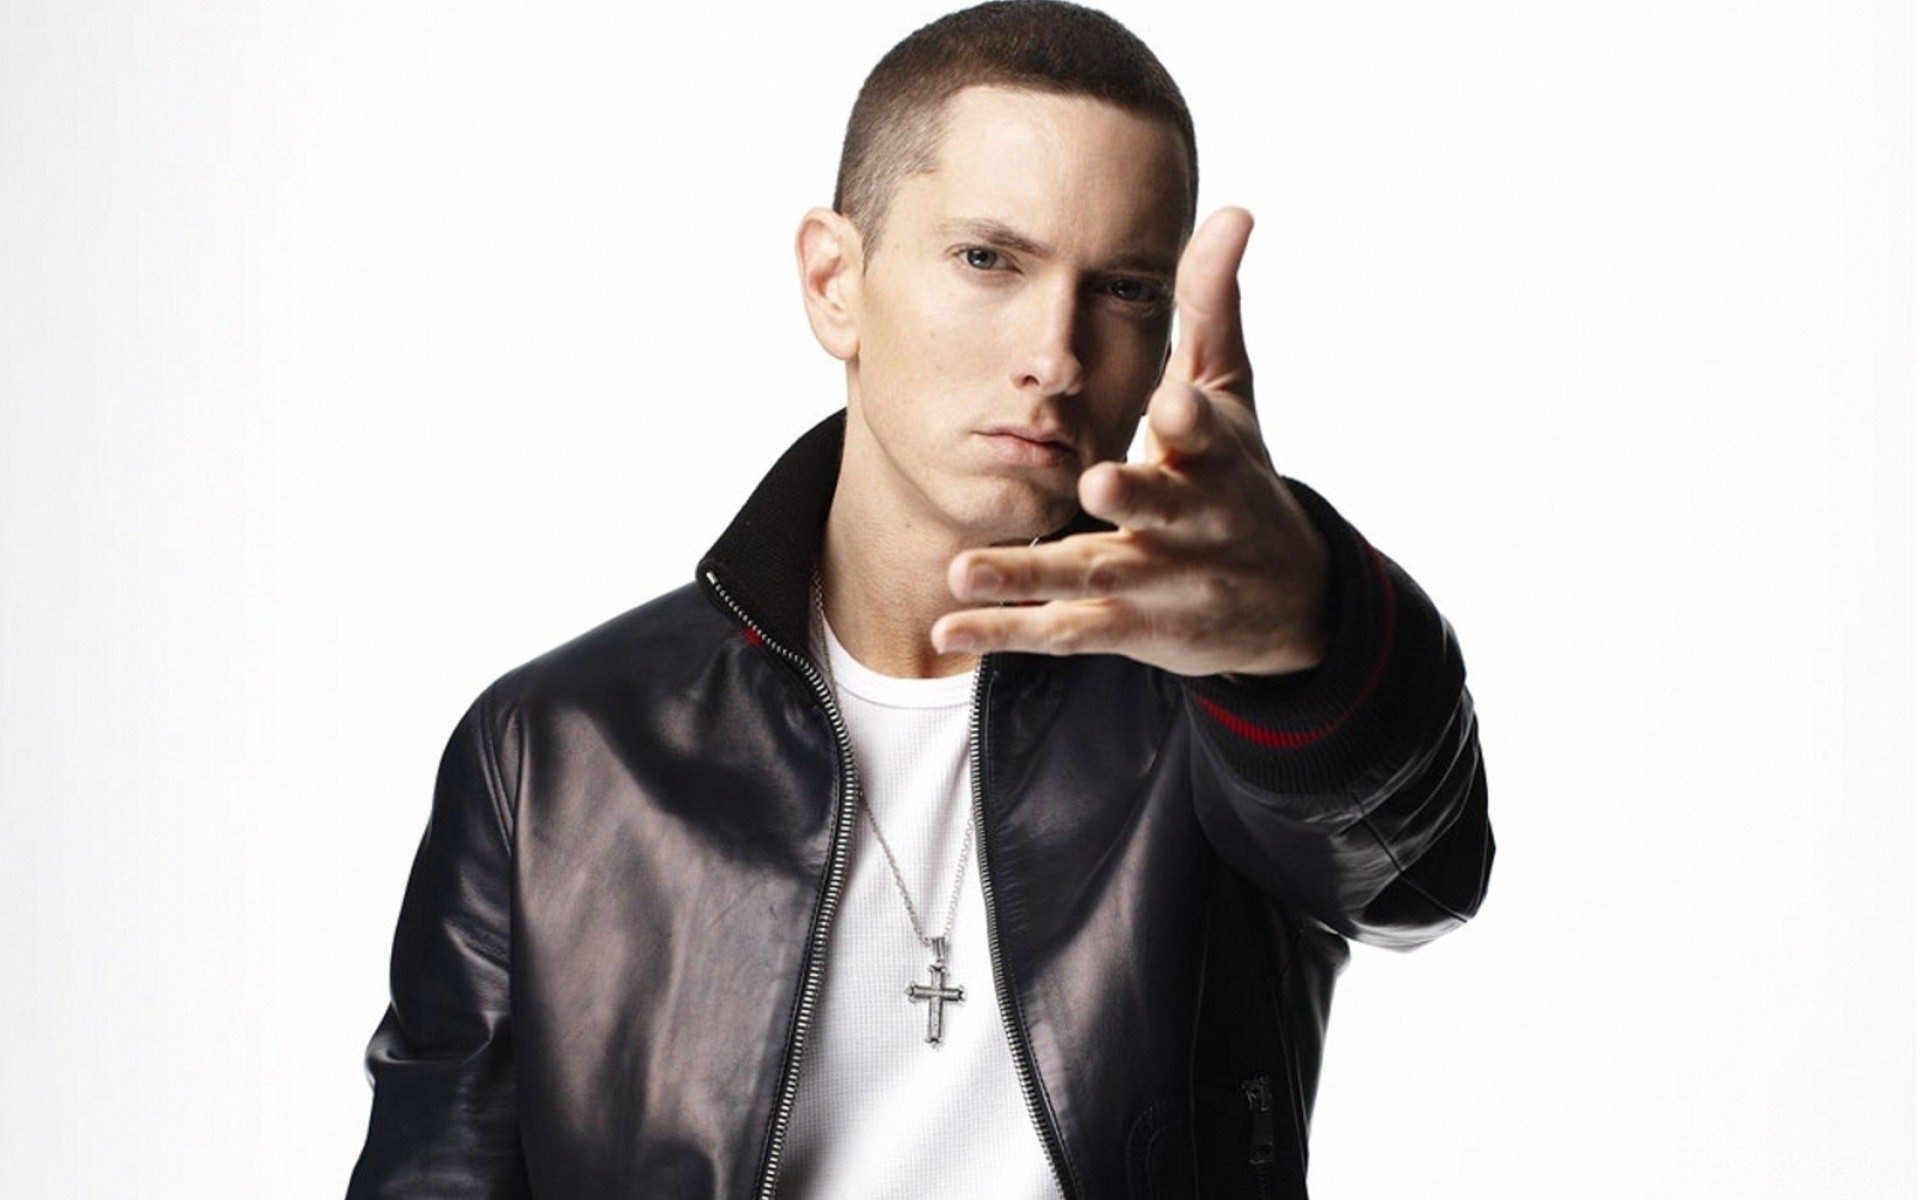 Eminem Hd Wallpapers - Eminem 18 Years Old , HD Wallpaper & Backgrounds